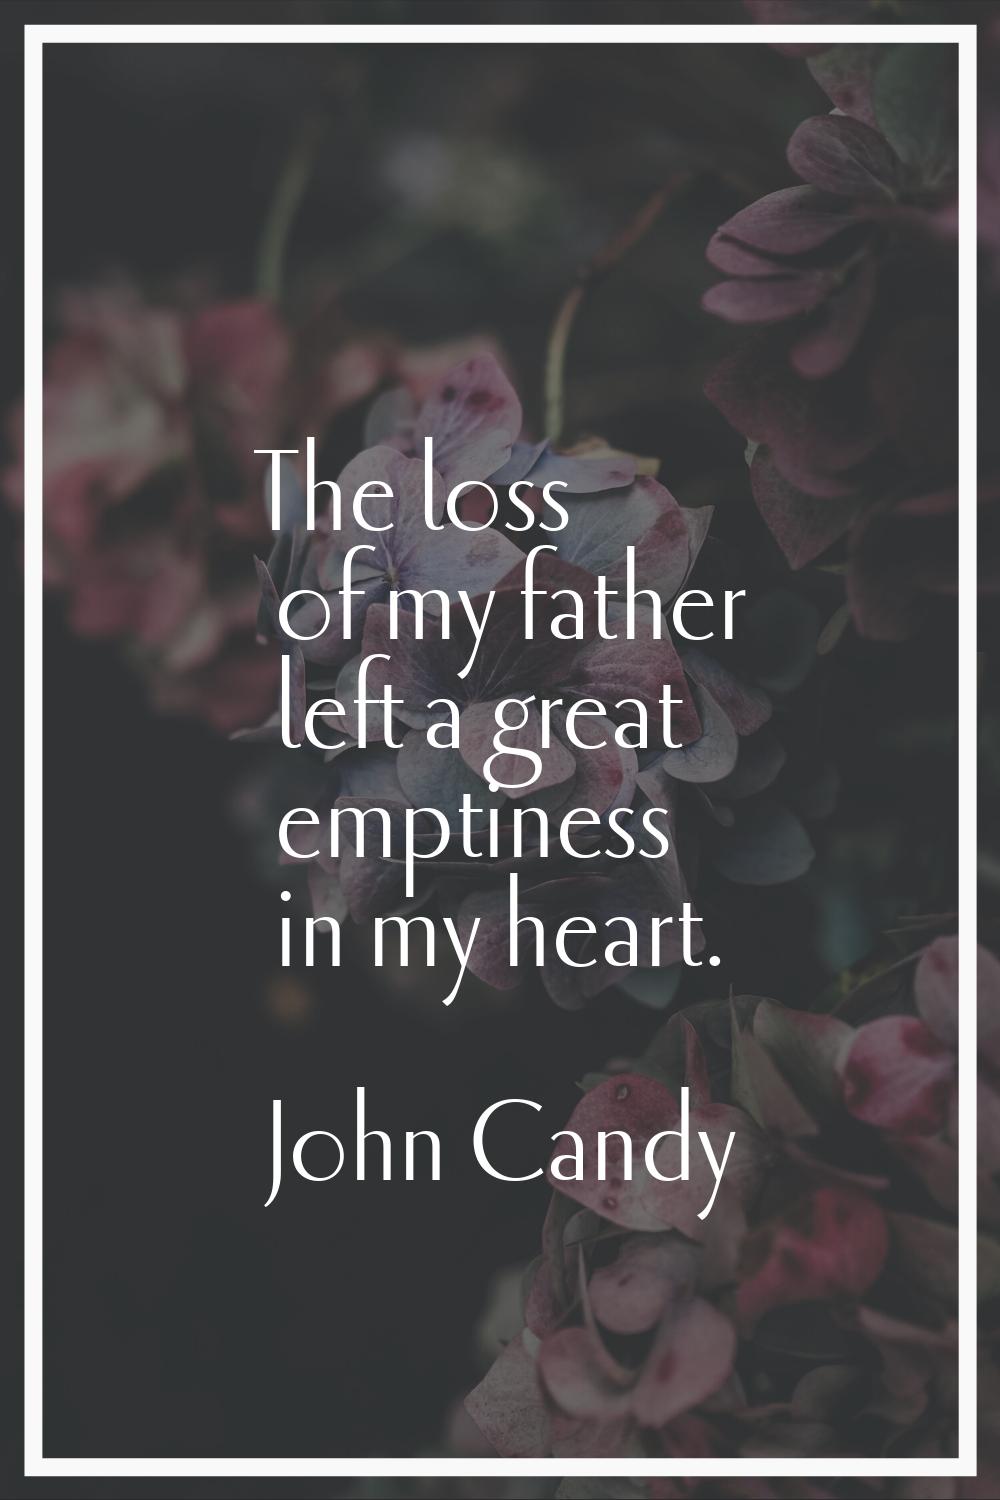 The loss of my father left a great emptiness in my heart.